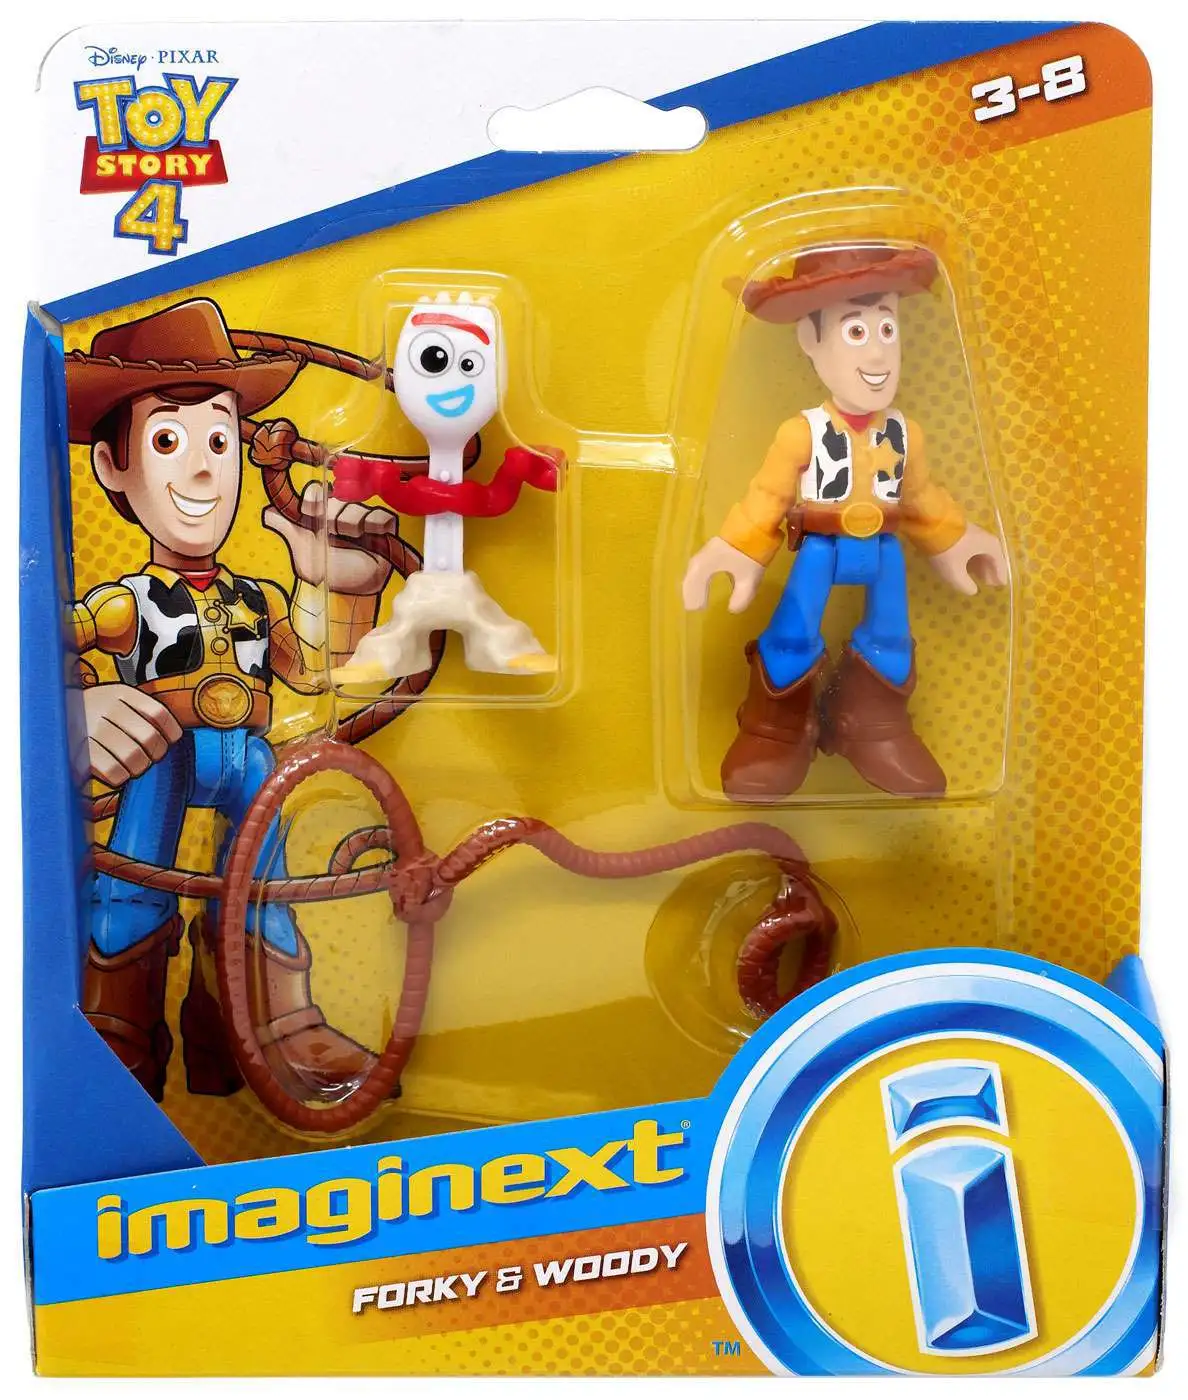 Forky & Woody Details about   Disney Pixar Toy Story 4 Imaginext 